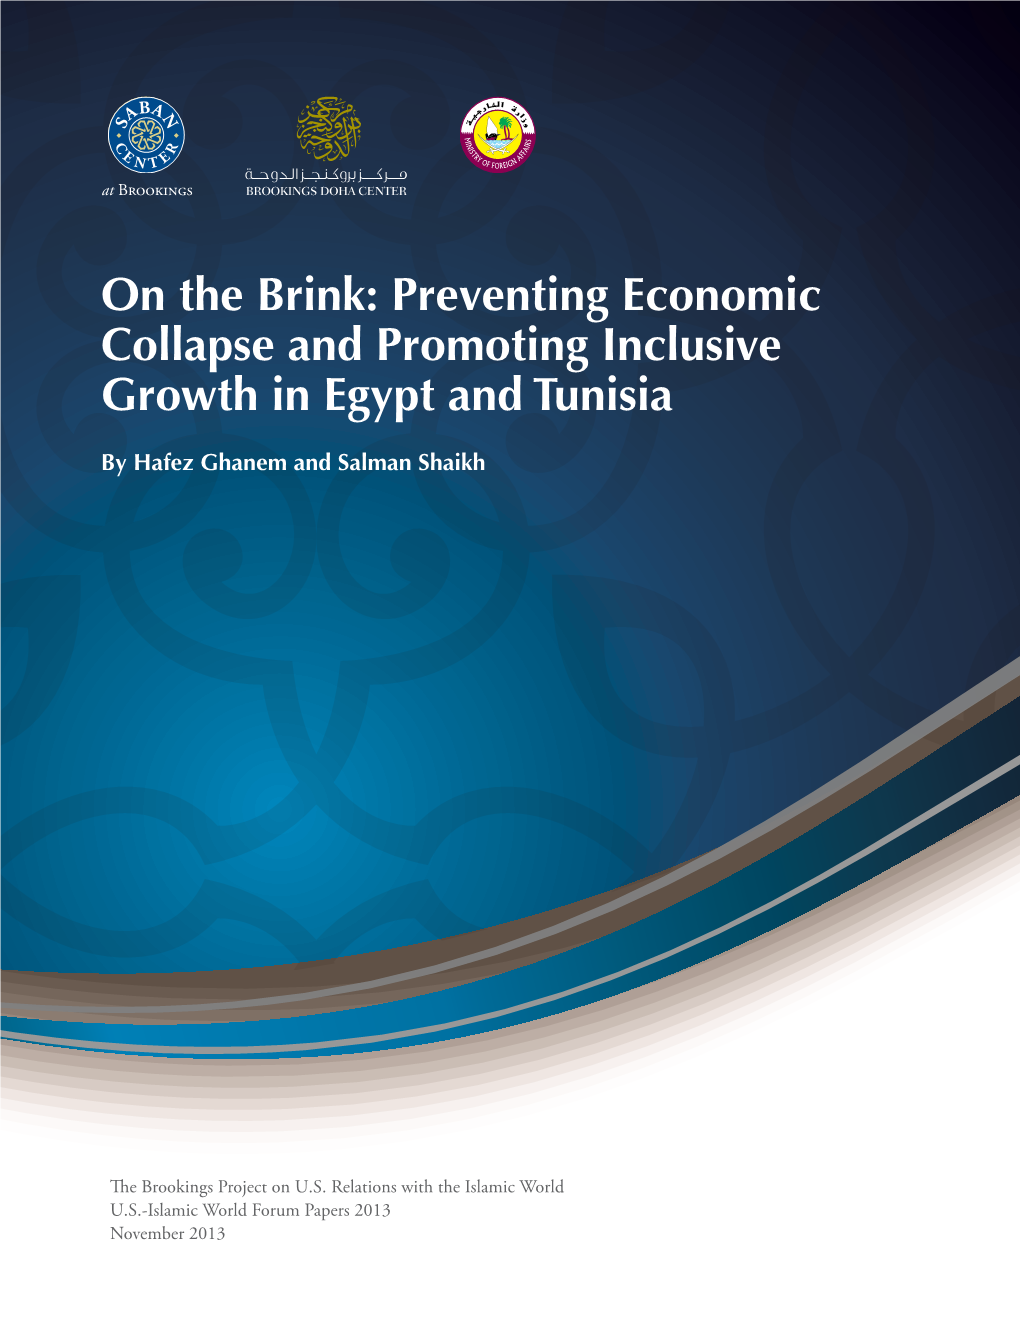 On the Brink: Preventing Economic Collapse and Promoting Inclusive Growth in Egypt and Tunisia